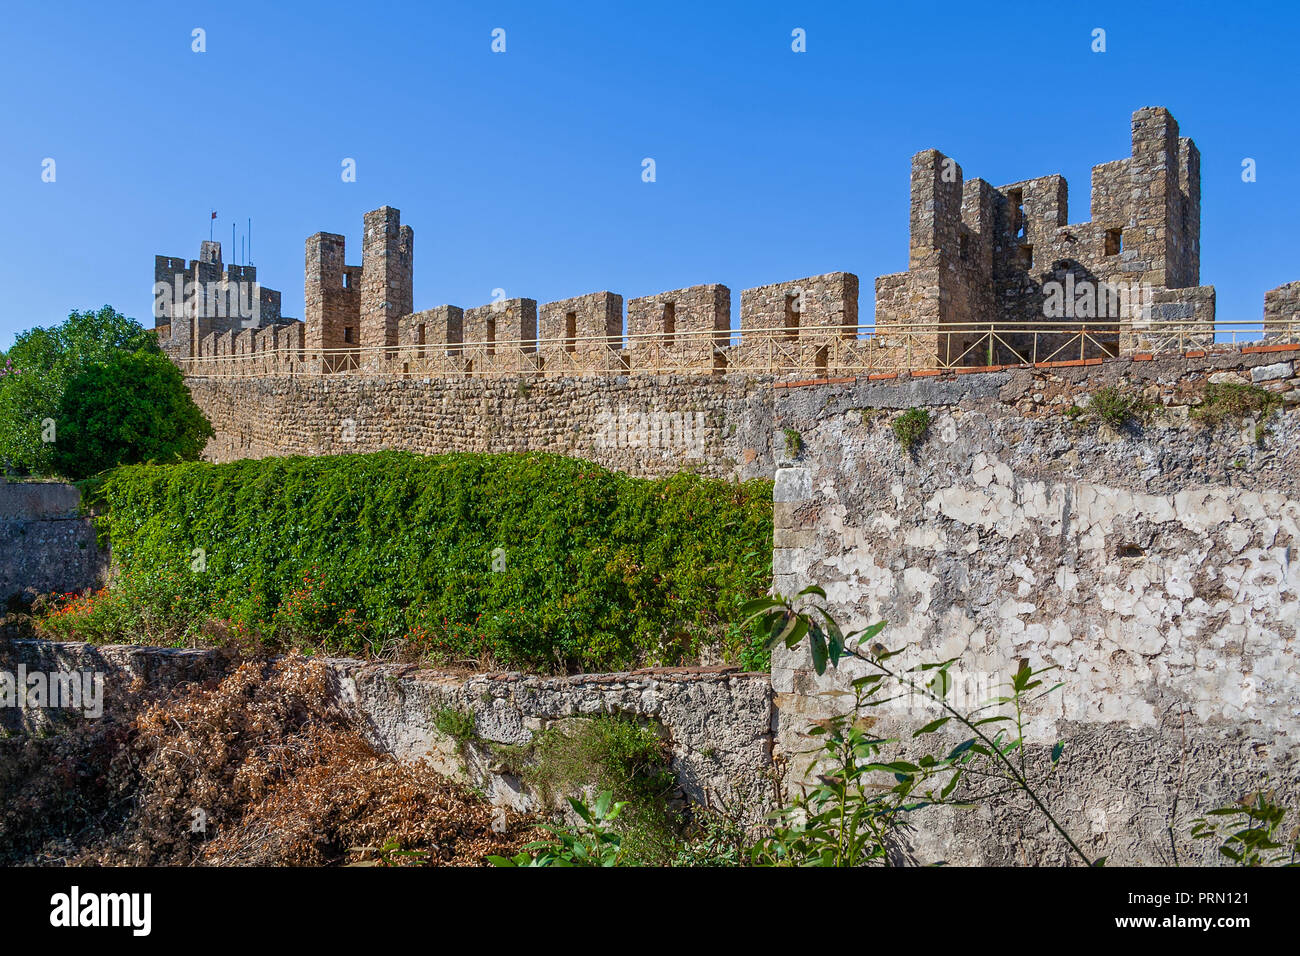 Castle of Tomar. The Knights Templar fortress which surrounds and protects the Convent of Christ or Convento de Cristo. Tomar, Portugal Stock Photo